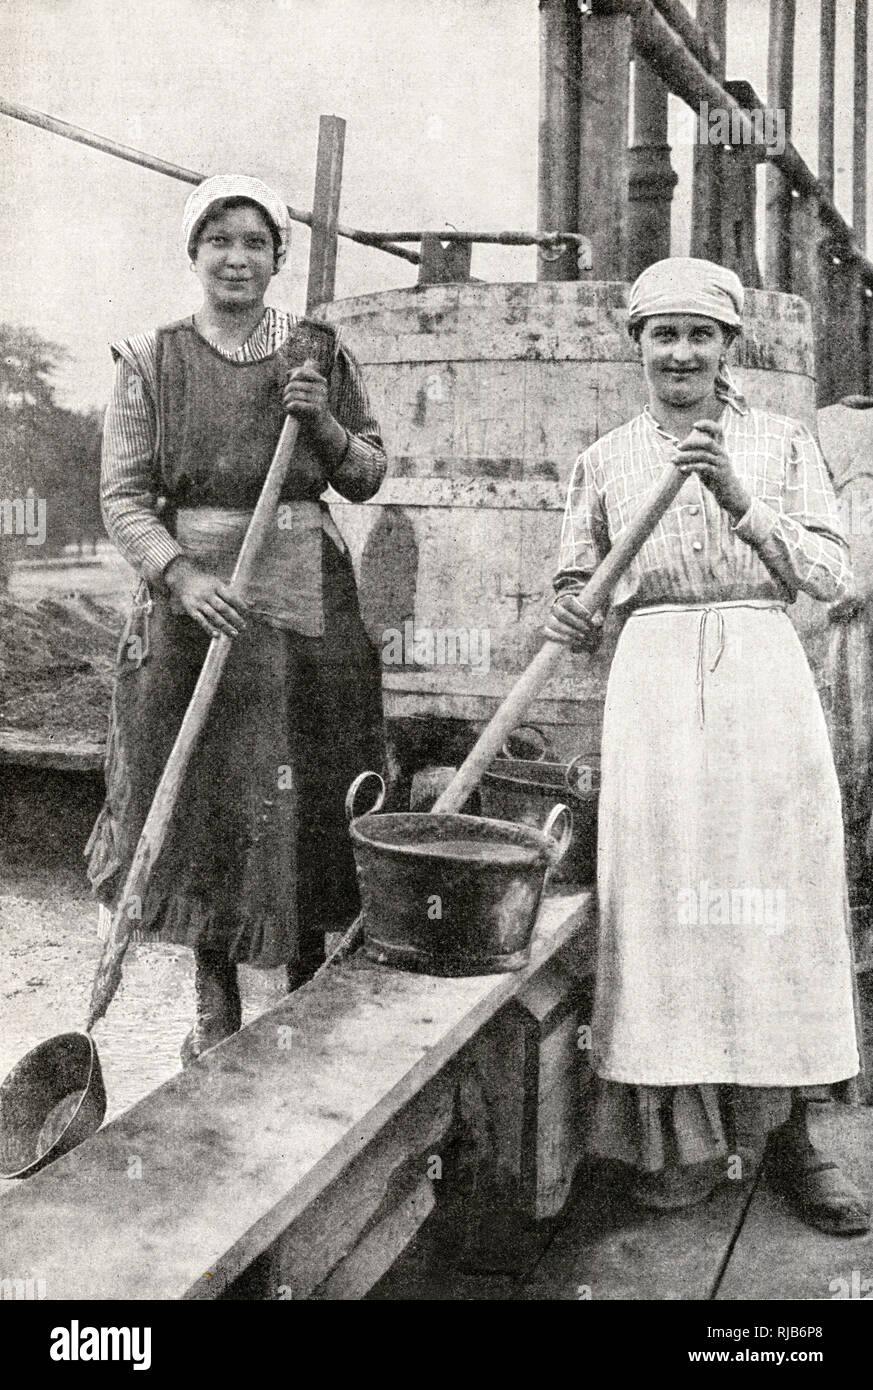 Two women doing building work, mixing cement, in a suburb of Vienna, Austria. Stock Photo